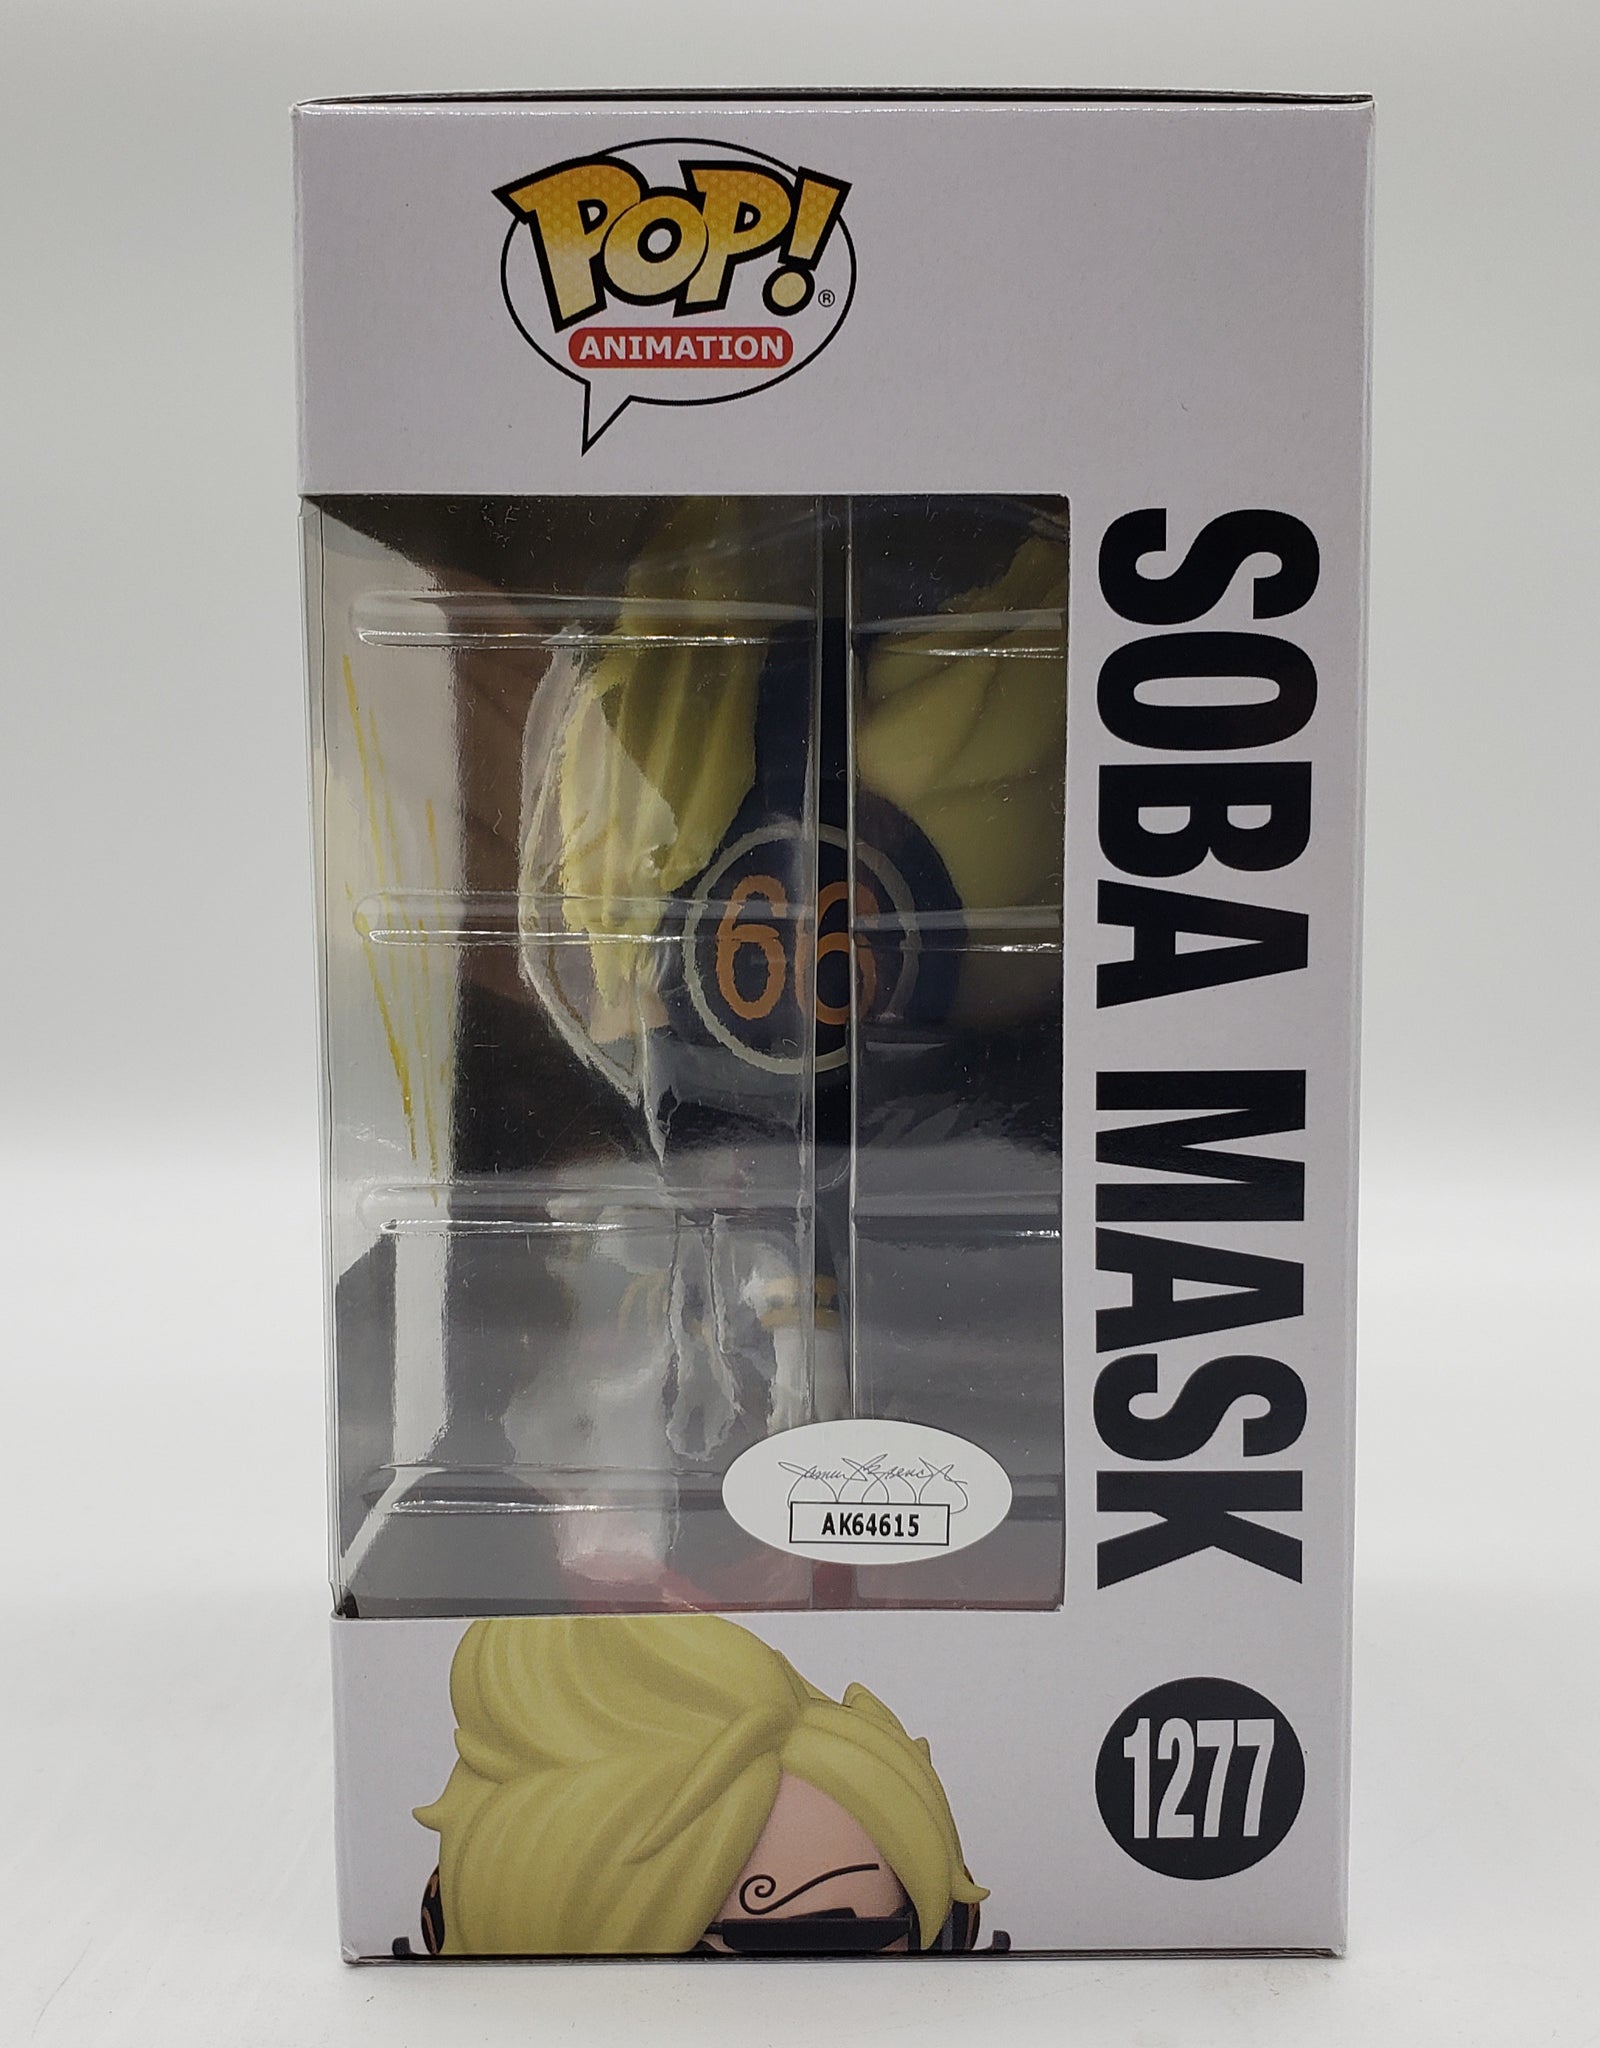 Funko POP! Soba Mask One Piece #1277 [Chalice Collectibles